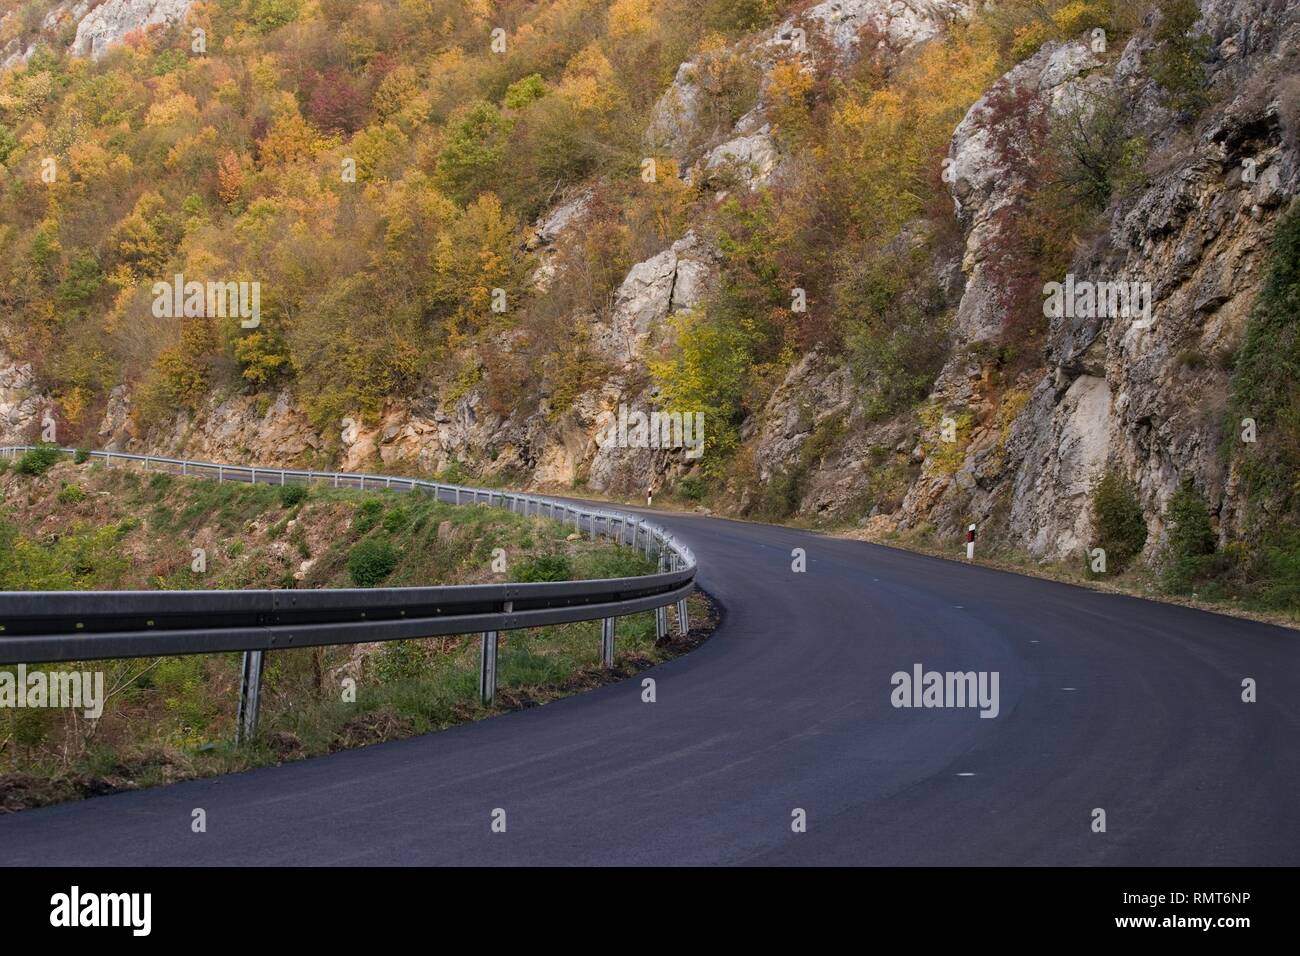 New black bitumen asphalt road in the Balkan Mountains regions of Eastern Republic of Serbia, Central Europe. Stock Photo